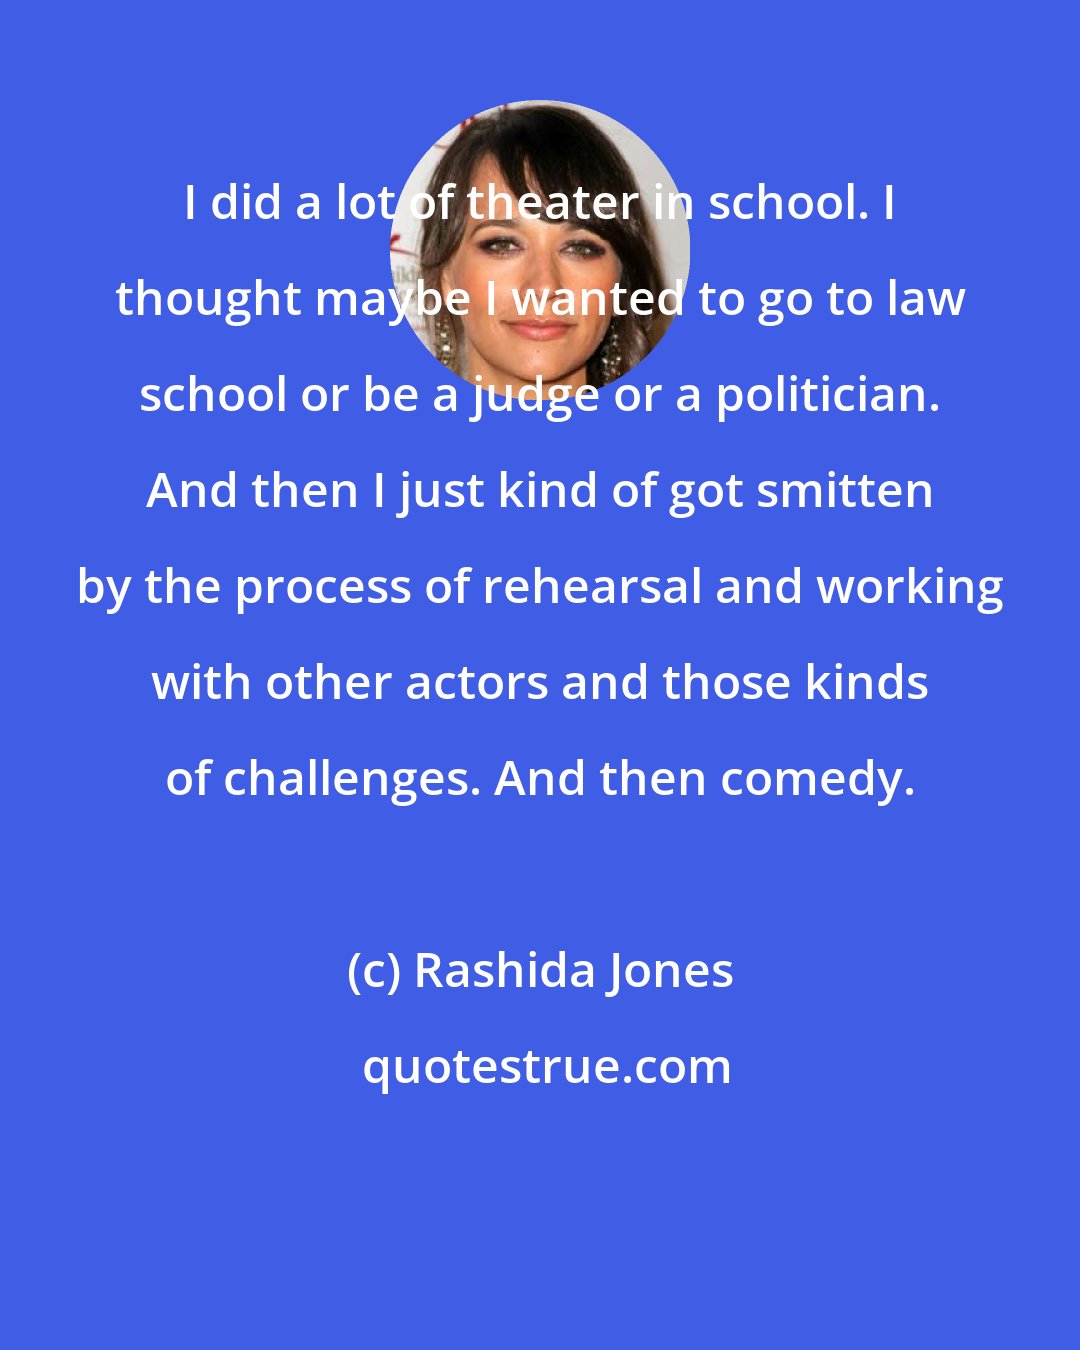 Rashida Jones: I did a lot of theater in school. I thought maybe I wanted to go to law school or be a judge or a politician. And then I just kind of got smitten by the process of rehearsal and working with other actors and those kinds of challenges. And then comedy.